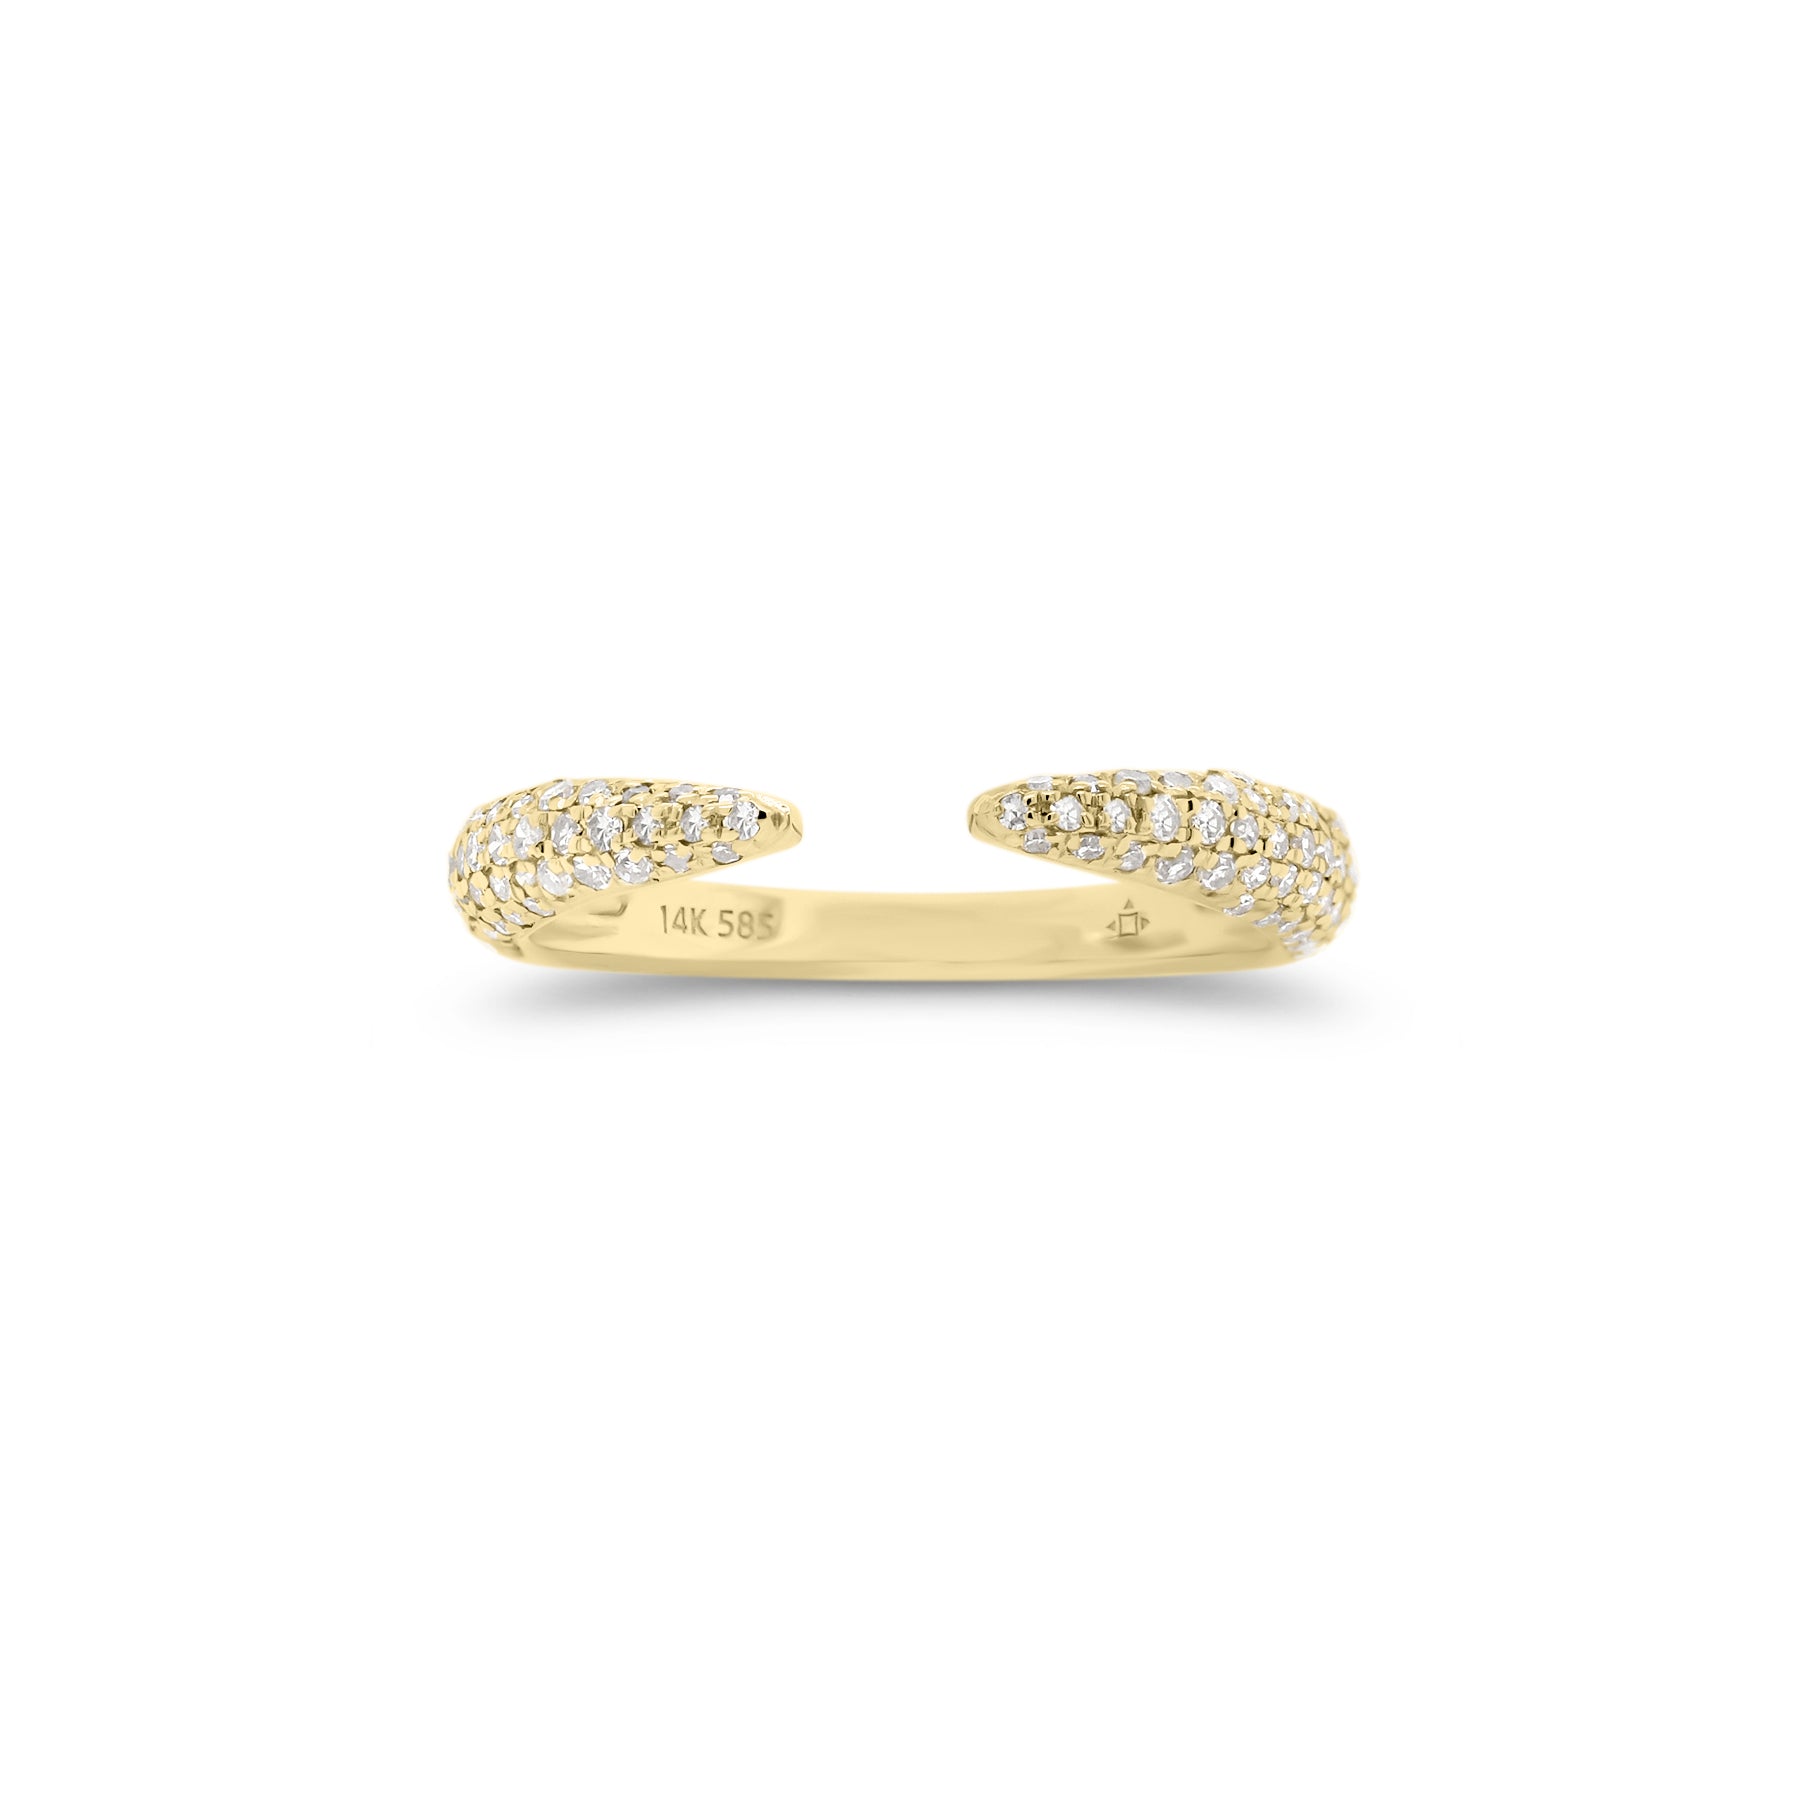 Pave Diamond Claw Ring - 14K gold weighing 1.27 grams  - 98 round diamonds totaling 0.23 carats